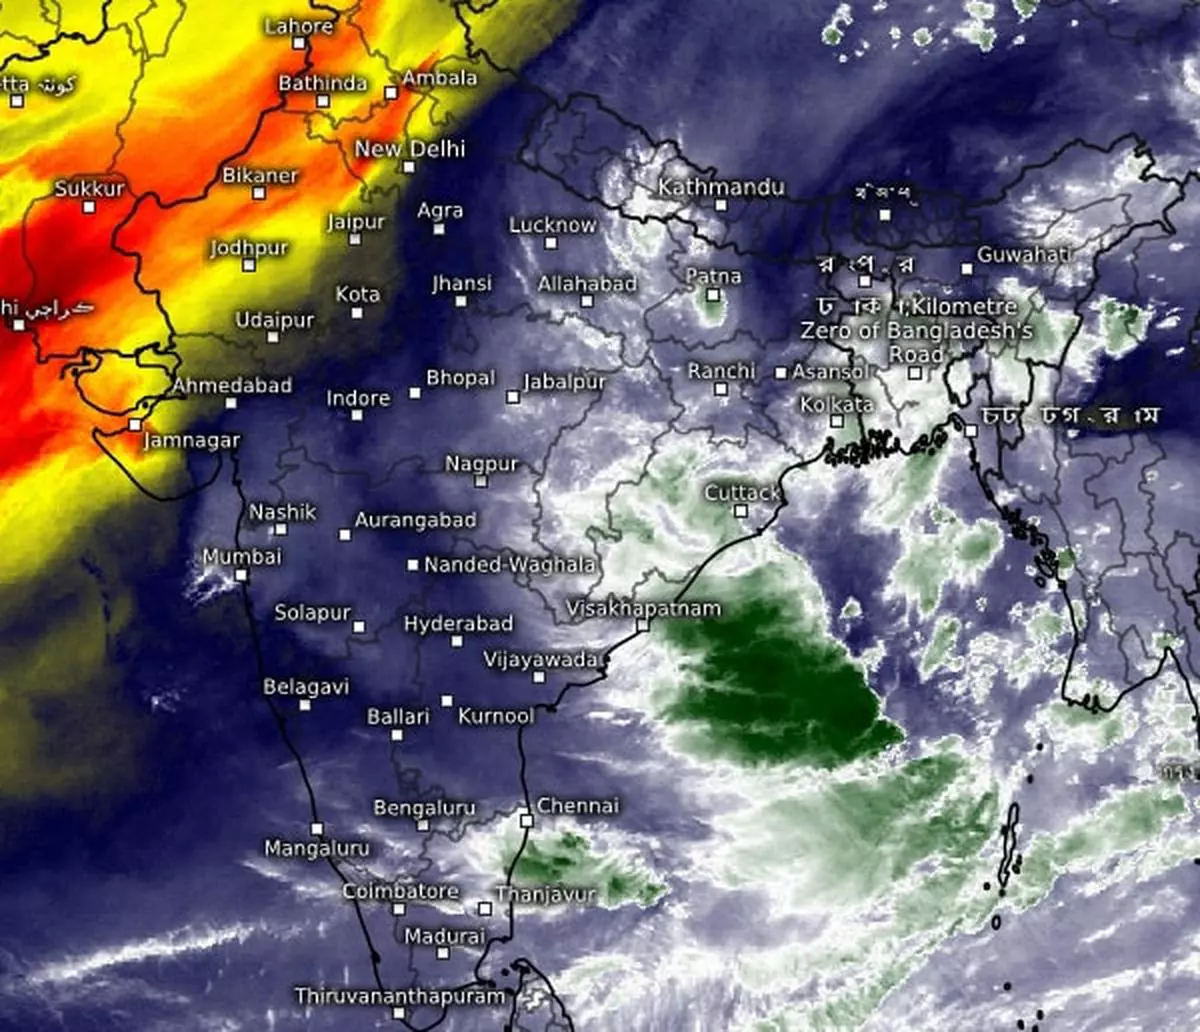 Satellite pictures on Sunday morning suggested the dry and warm air (in yellow and orange) emanating from across the international border into Rajasthan and Gujarat to signal withdrawal of the monsoon will not be allowed further leeway as monsoon clouds (in green and white) break into India’s East Coast ahead of a fresh low-pressurearea  over the Bay of Bengal.  